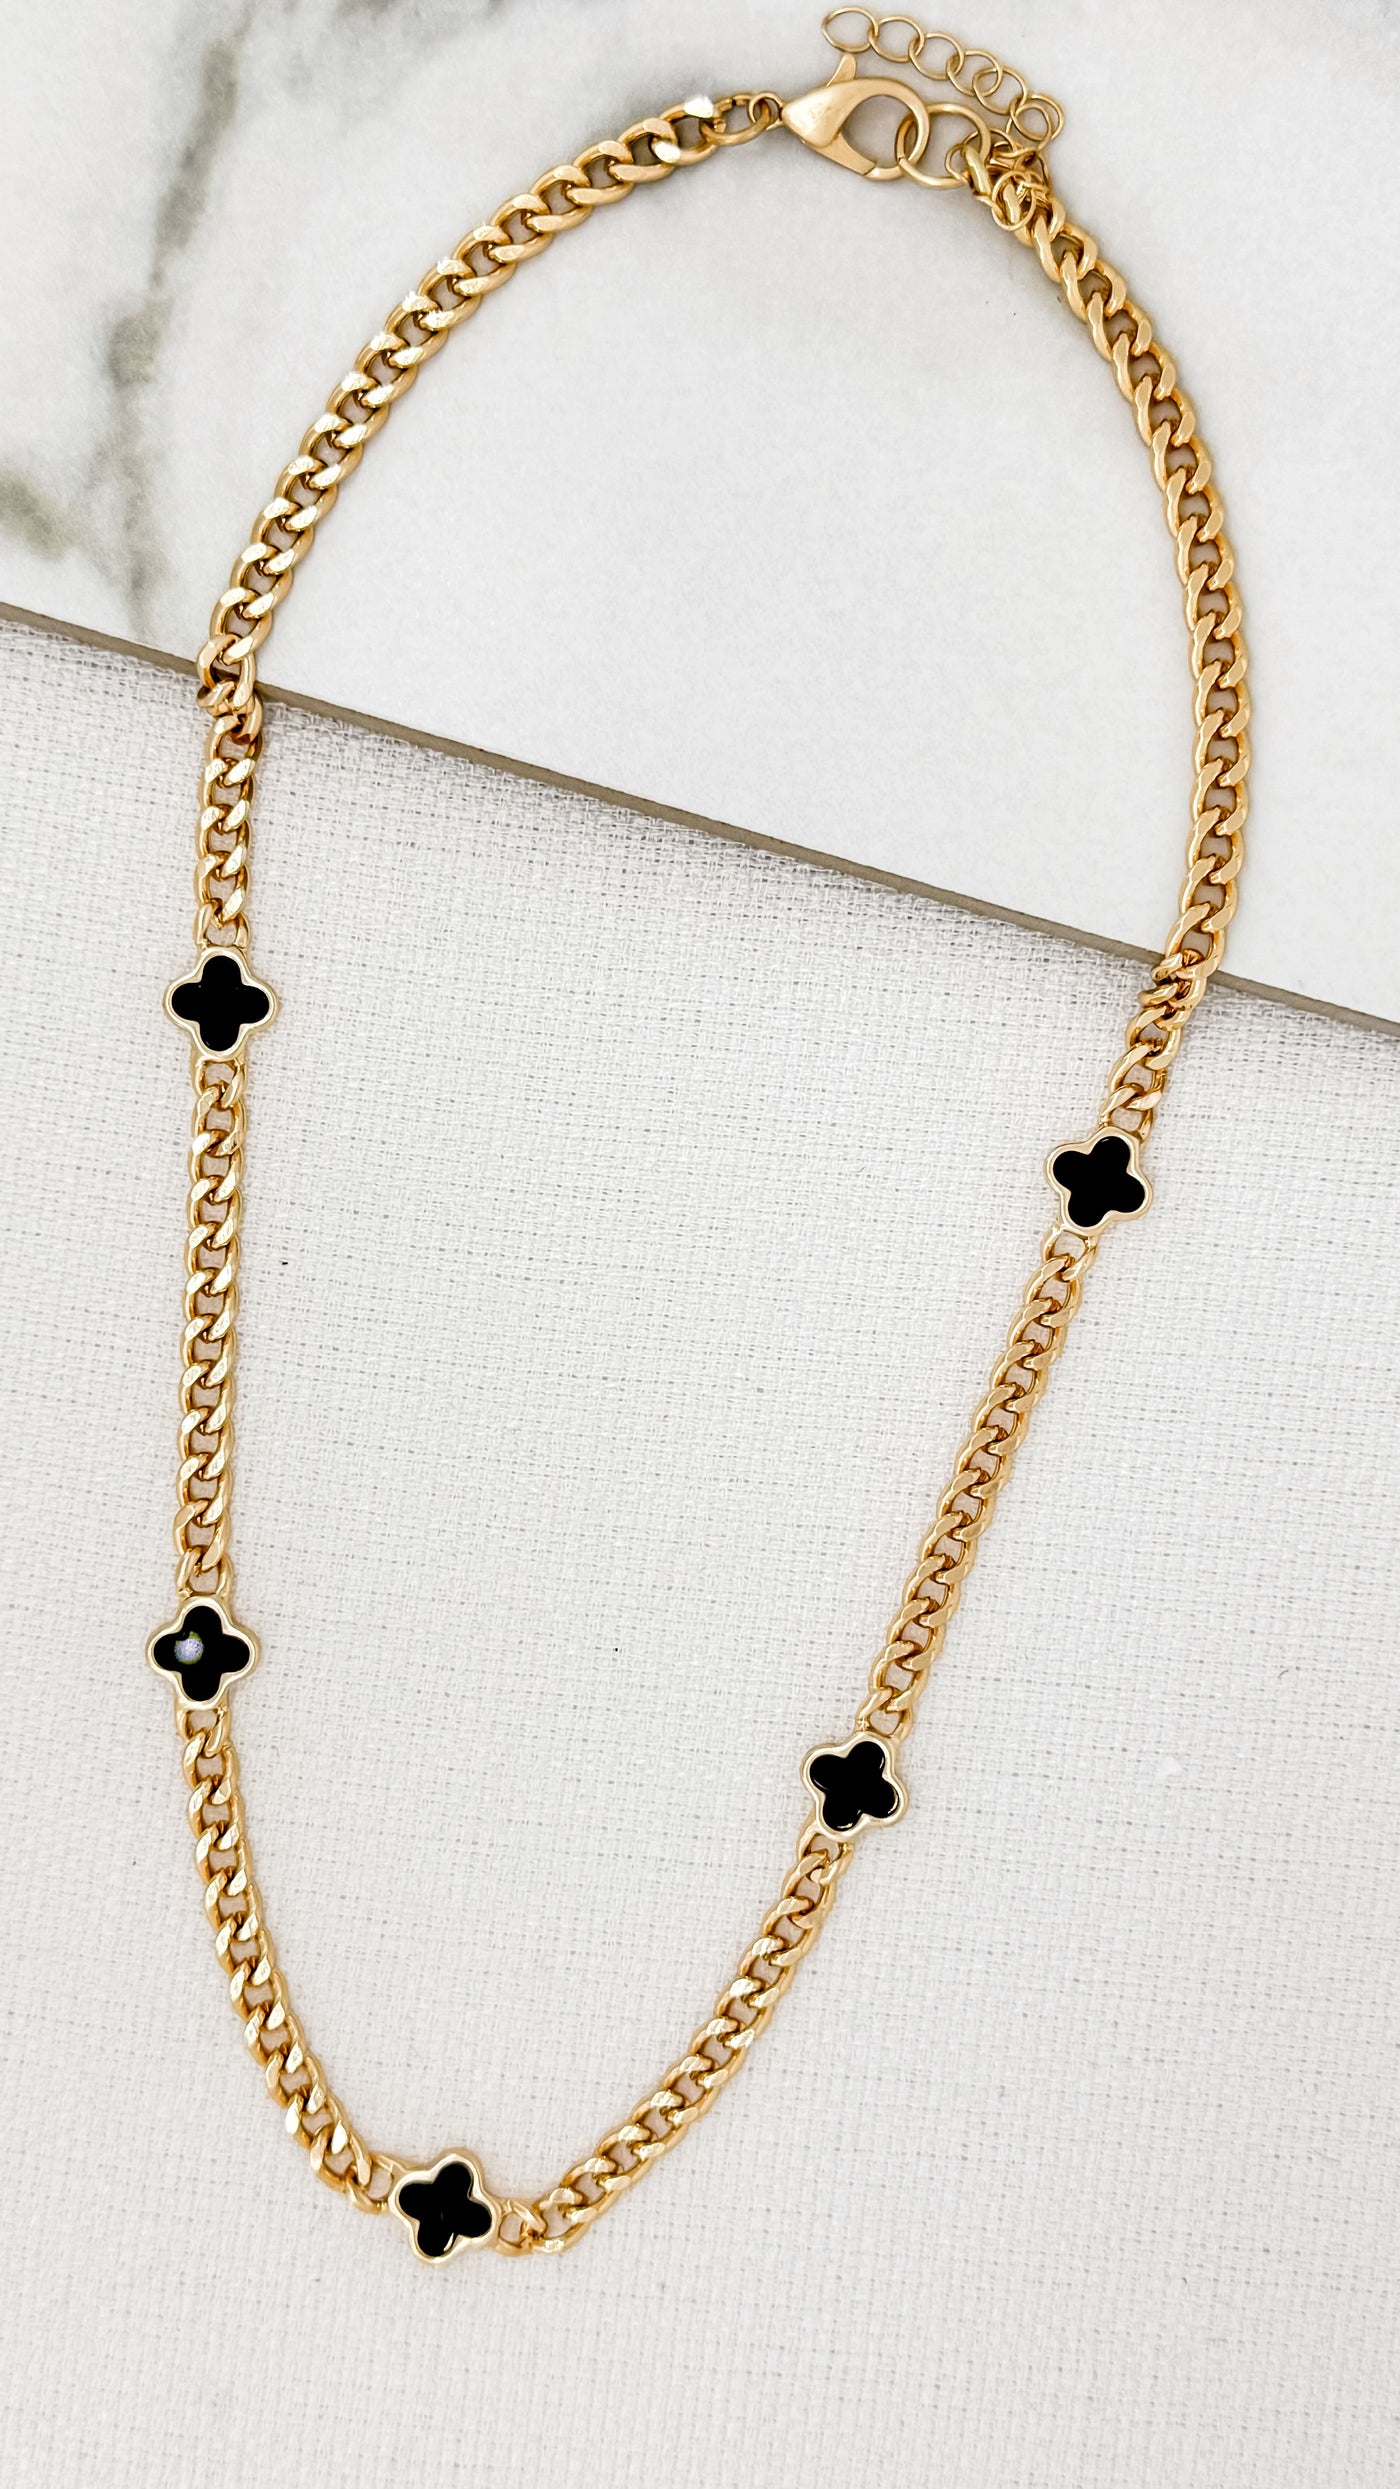 Gold Chain & Black Clovers Short Necklace